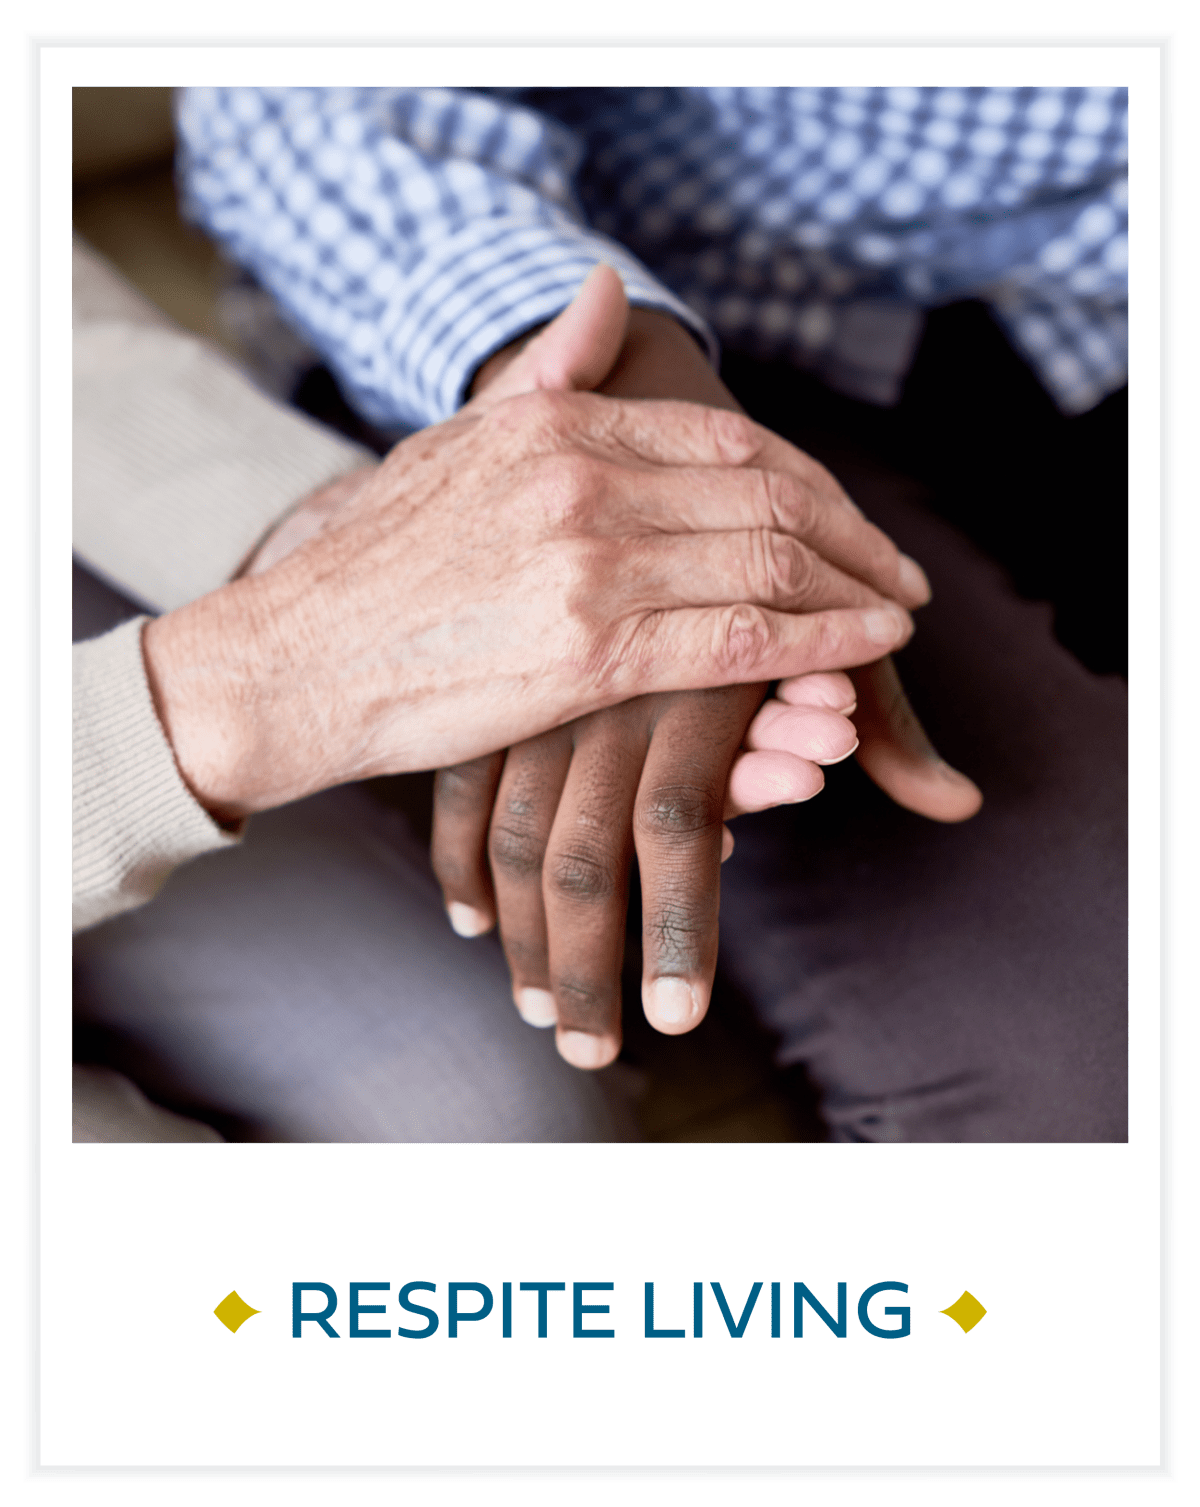 Respite care at Broadwell Senior Living in Plymouth, Minnesota